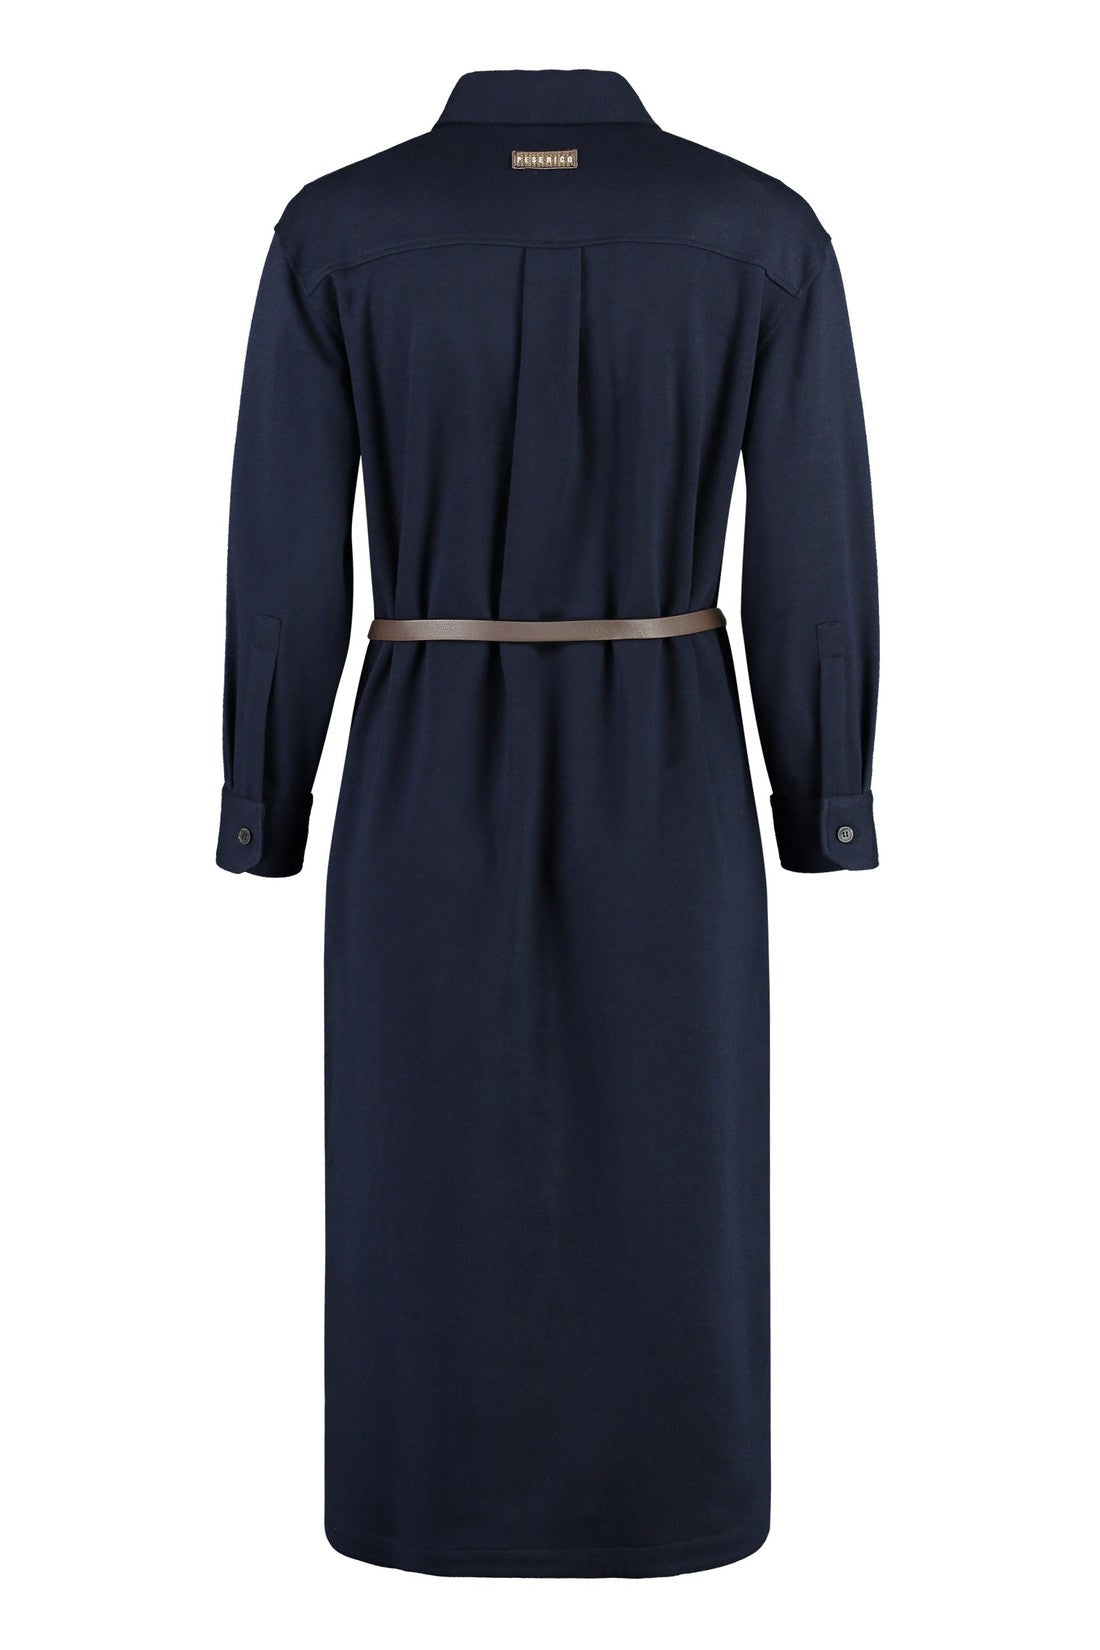 Peserico-OUTLET-SALE-Belted shirtdress-ARCHIVIST